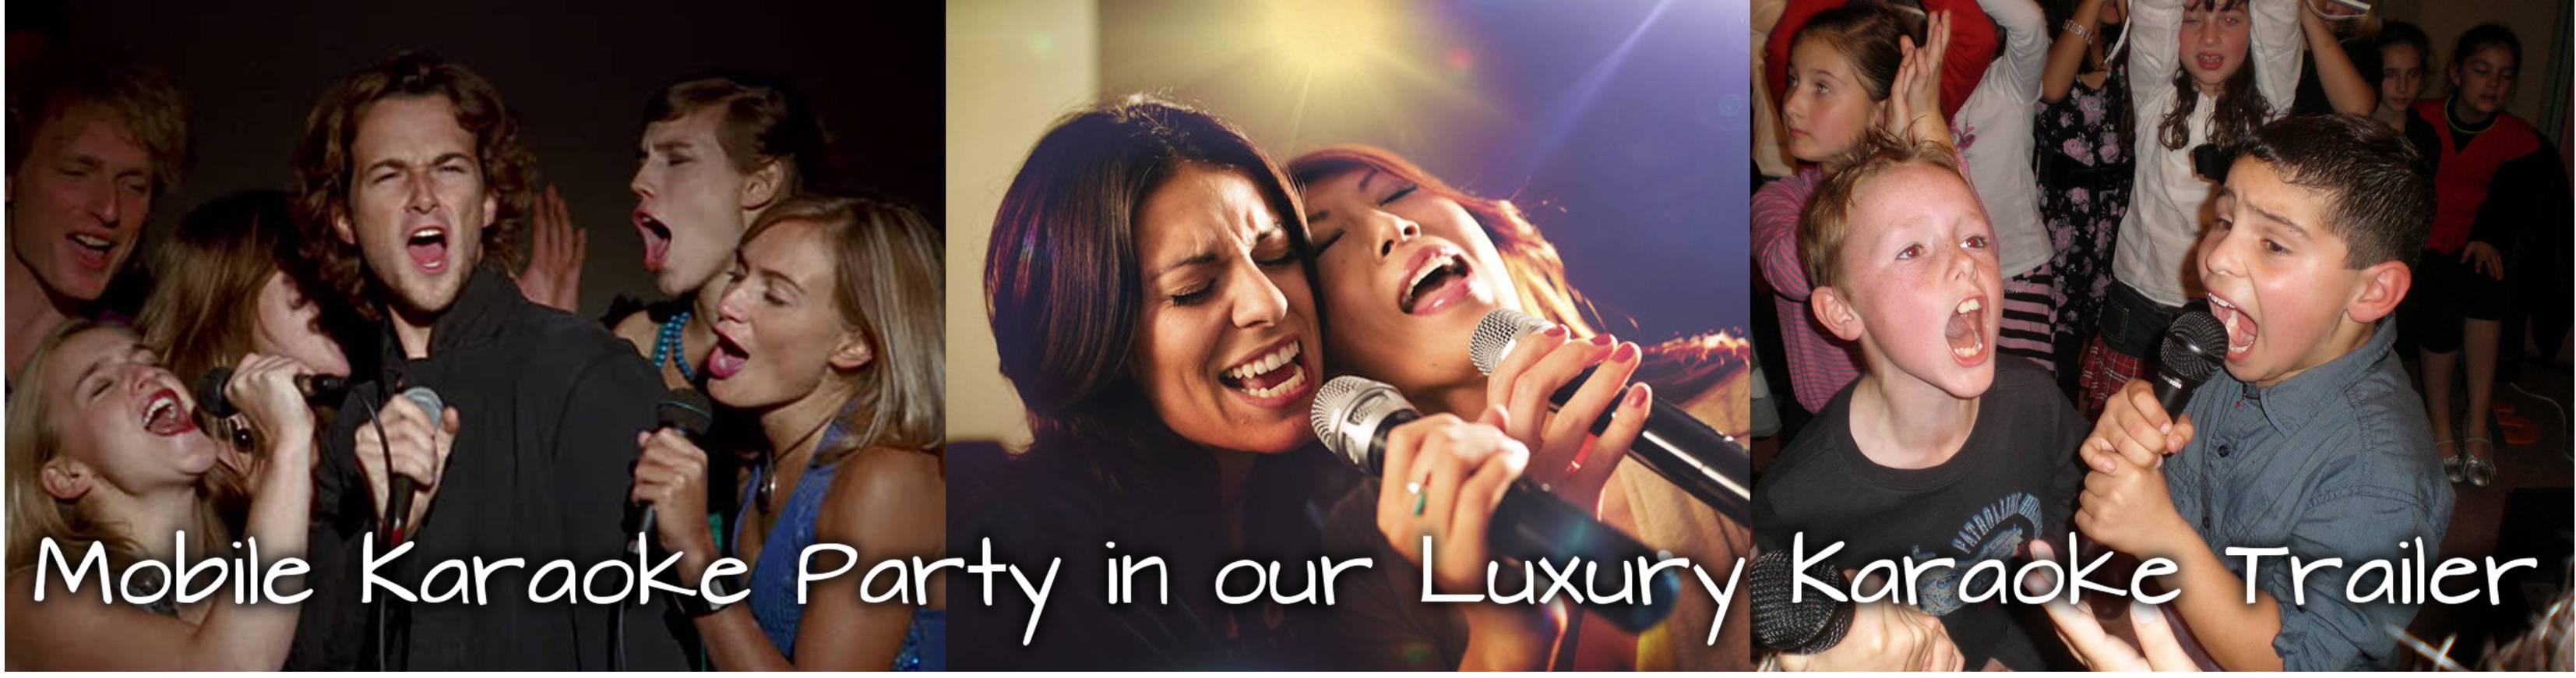 Mobile Karaoke Party - Party Room - New York City and Long Island